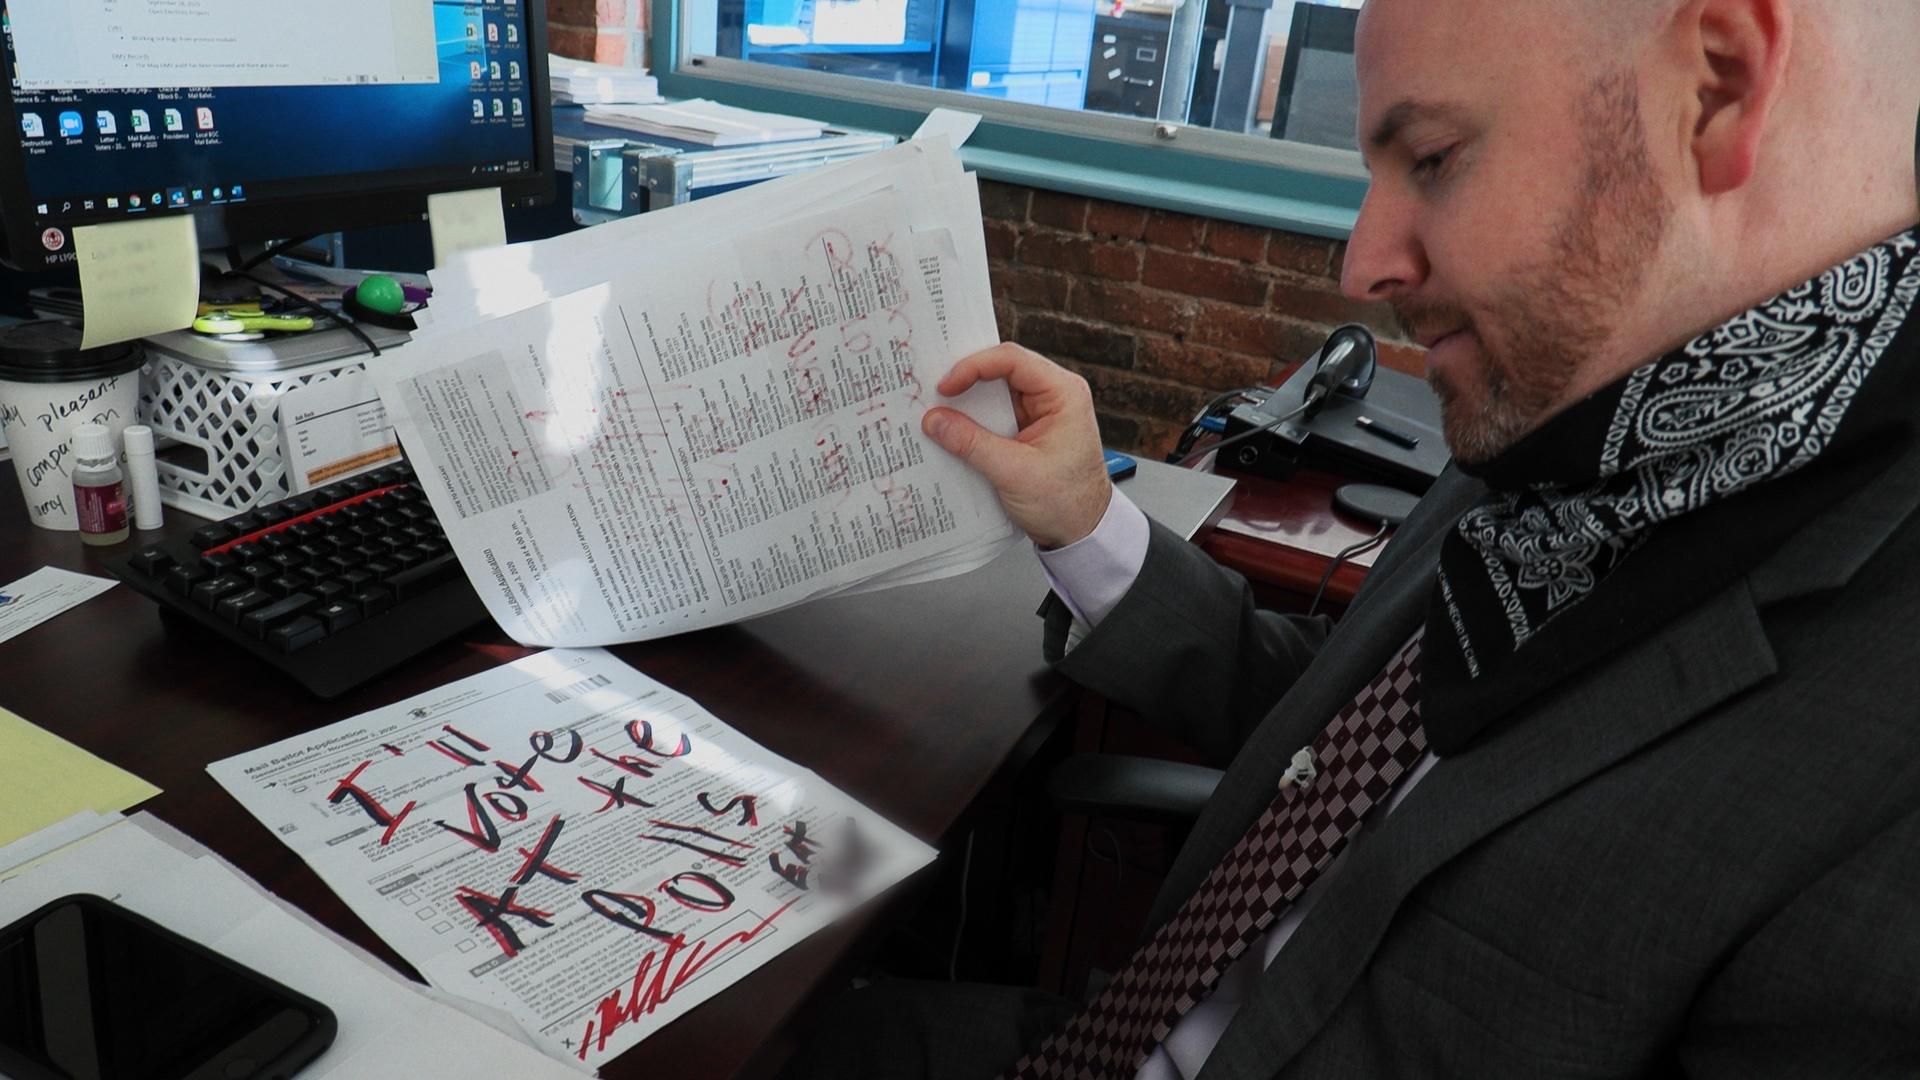 Rhode Island State Elections Director reads a hate message written on an application for a mail ballot.